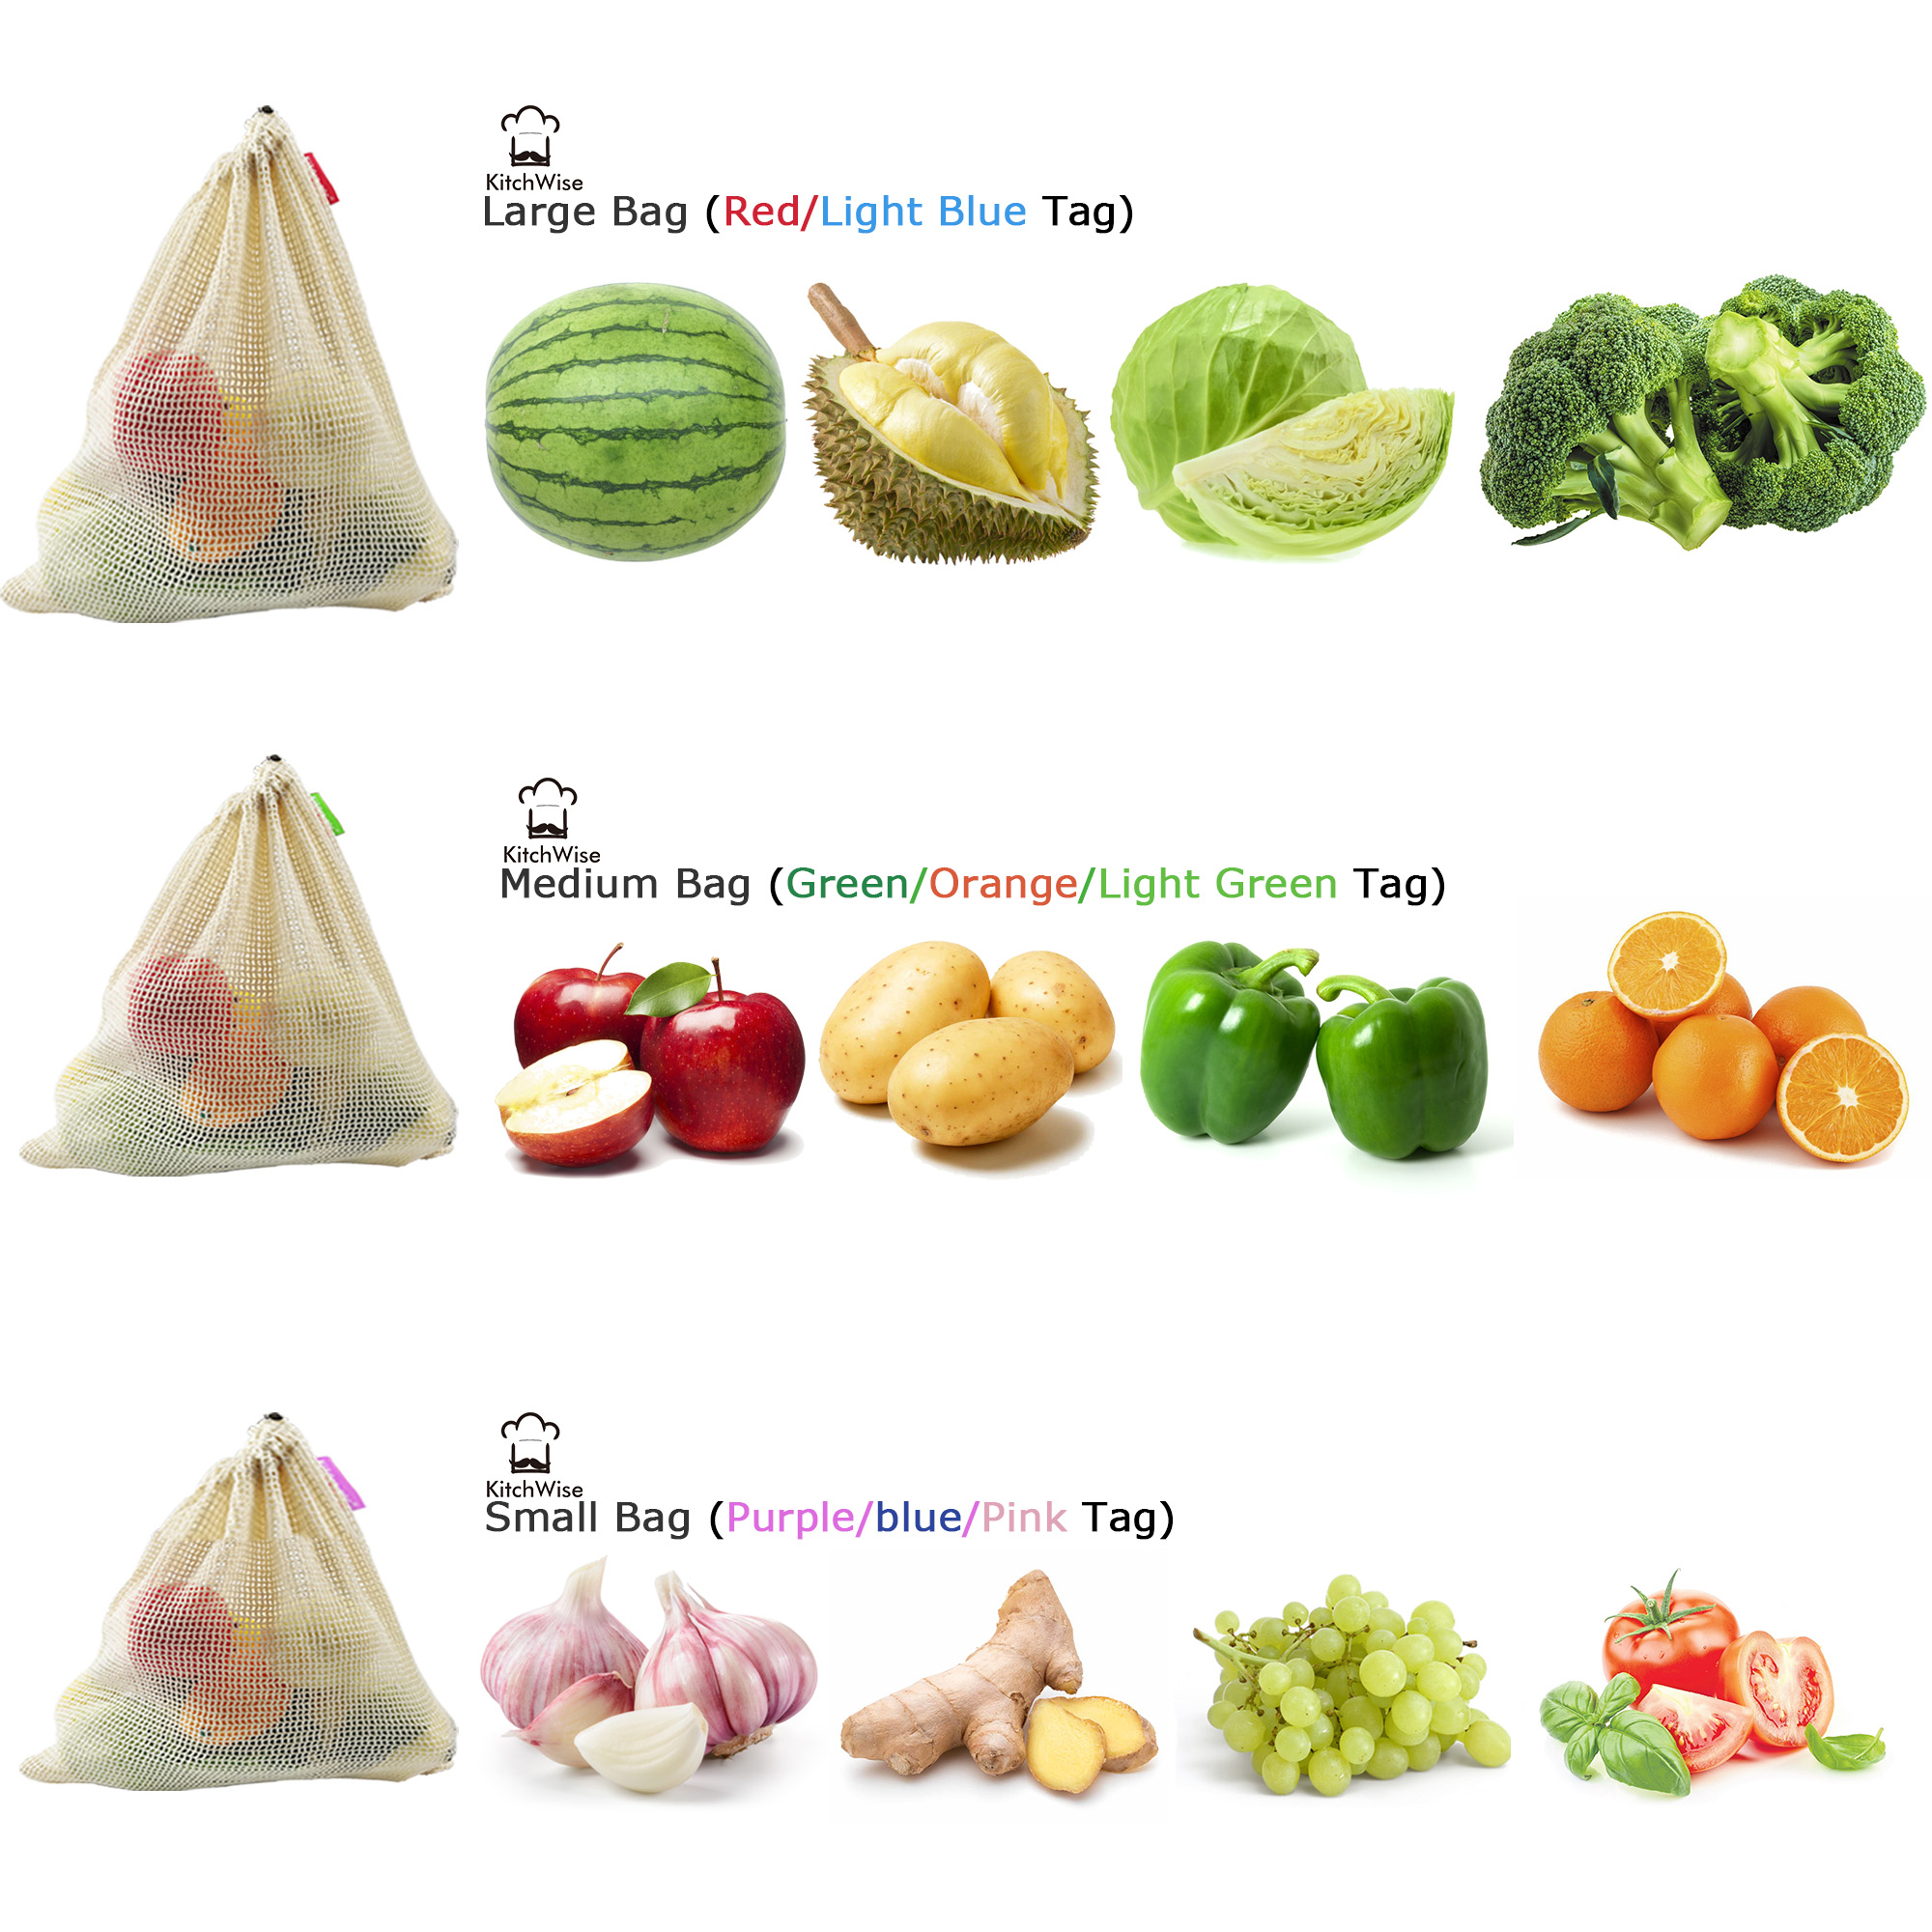 Kitchwise Reusable Grocery Produce Bags Ecofriendly Bags Set of 16